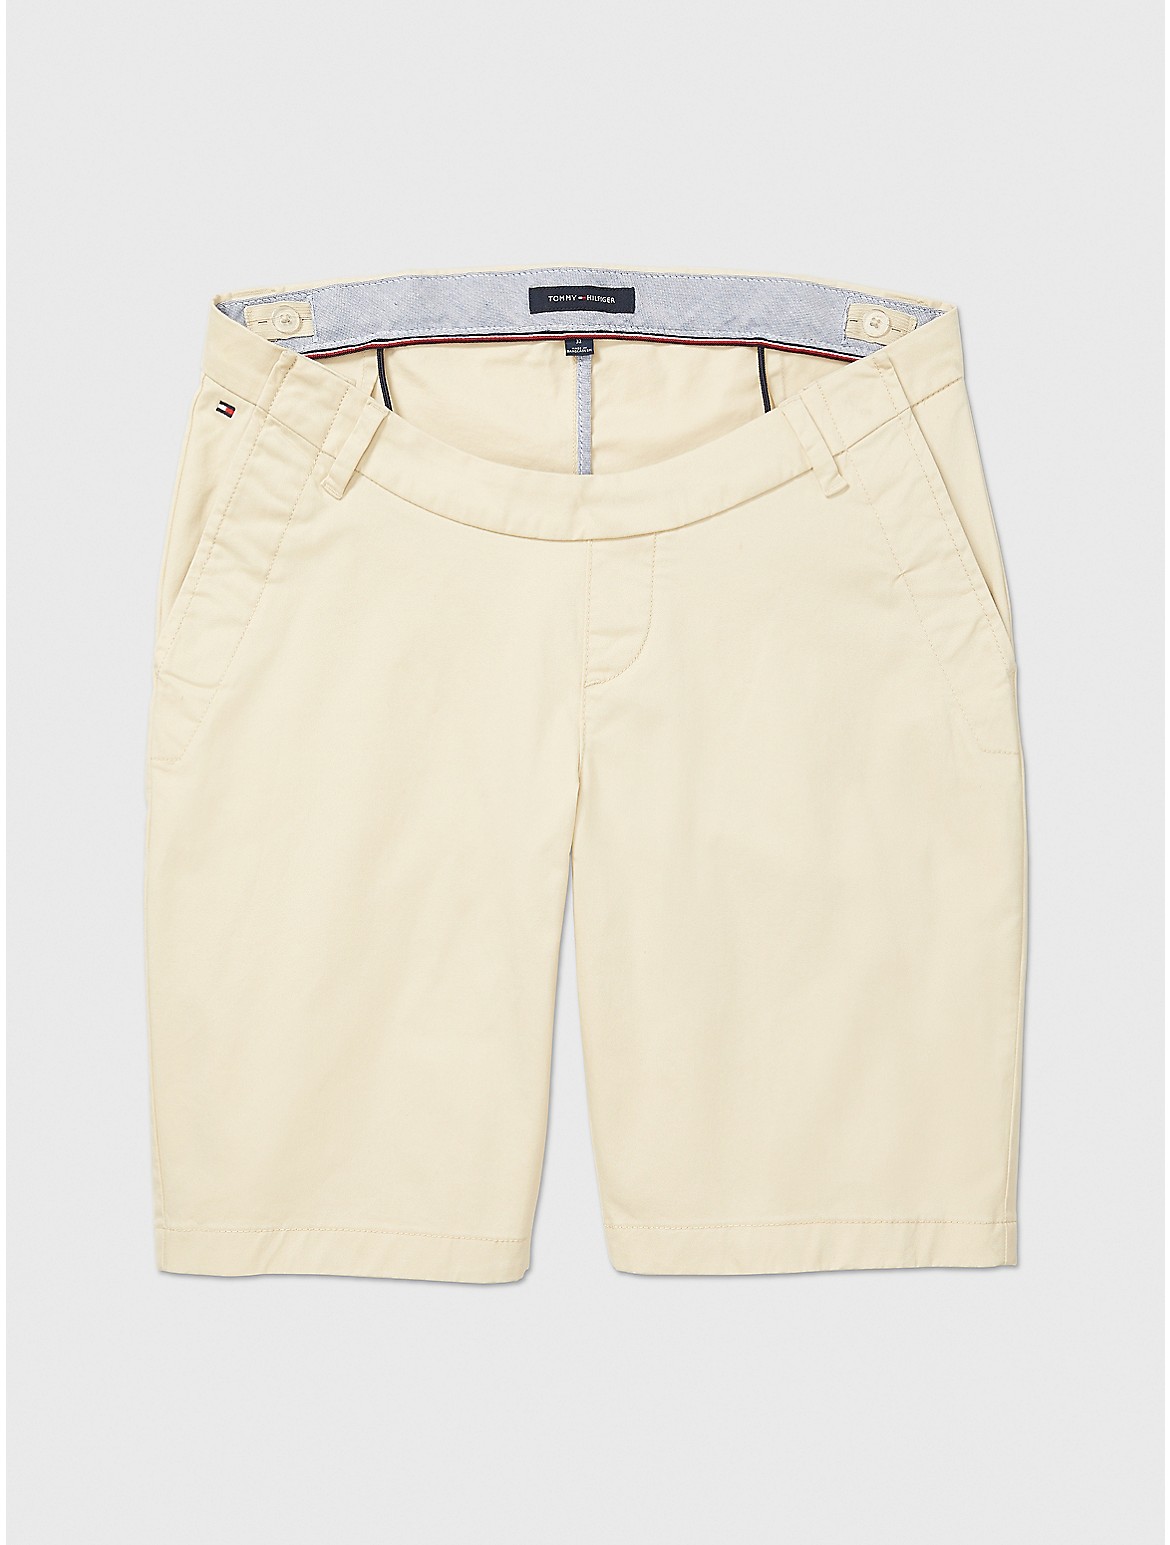 Tommy Hilfiger Seated Fit Classic Short In Sand Khaki